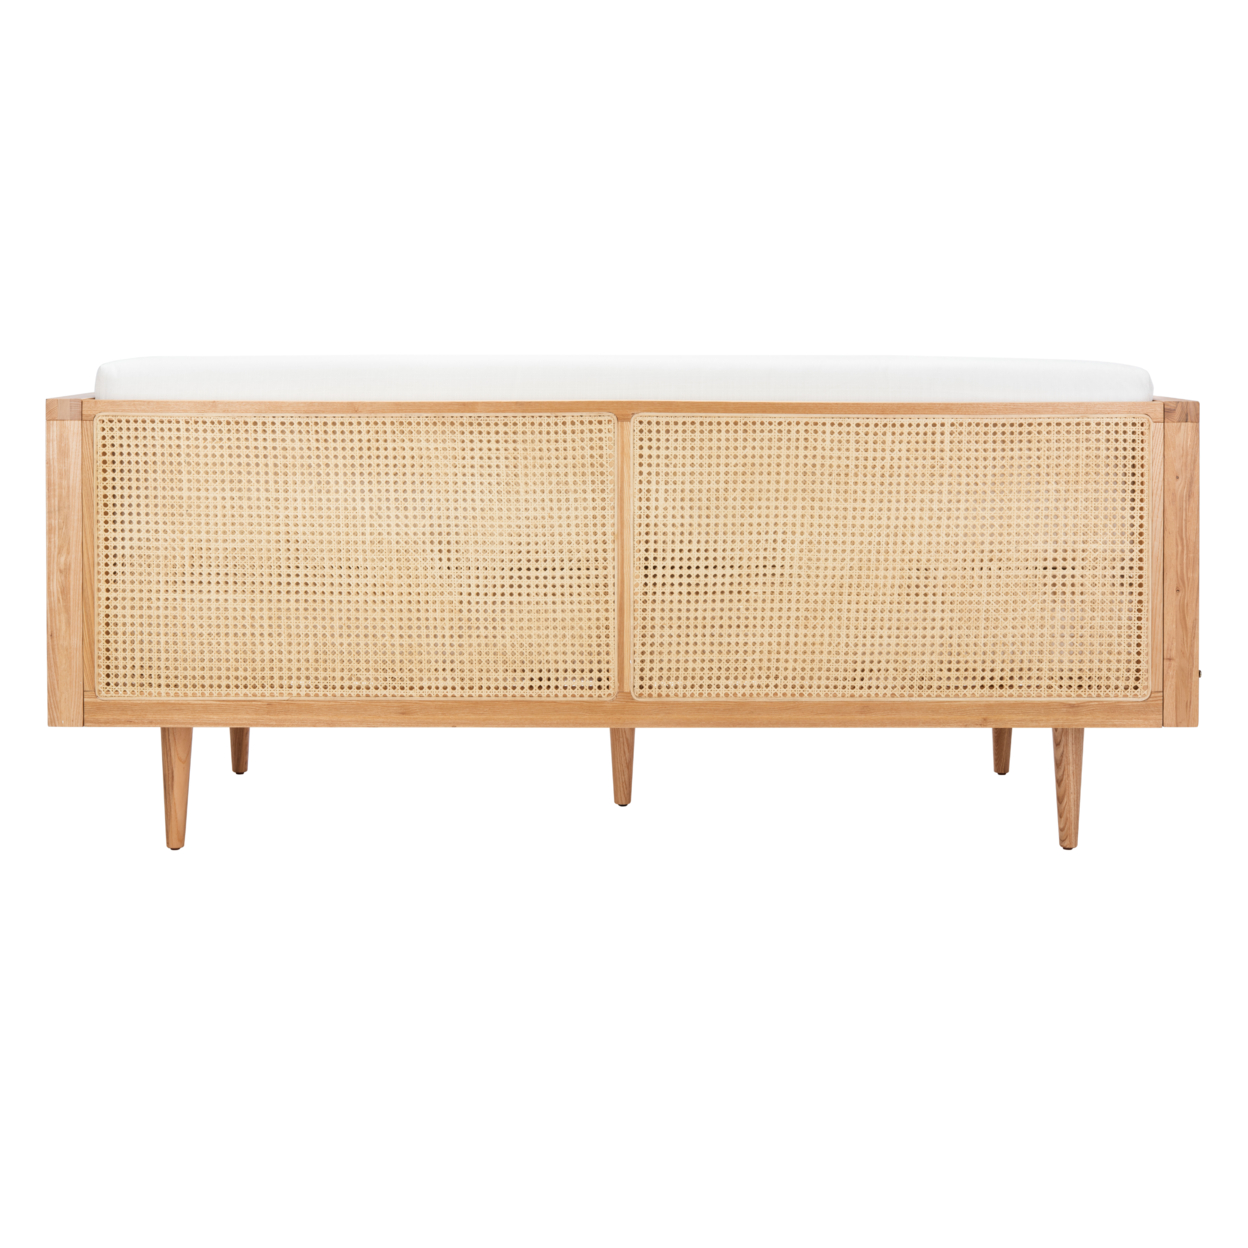 SAFAVIEH COUTURE Helena French Cane Daybed Natural